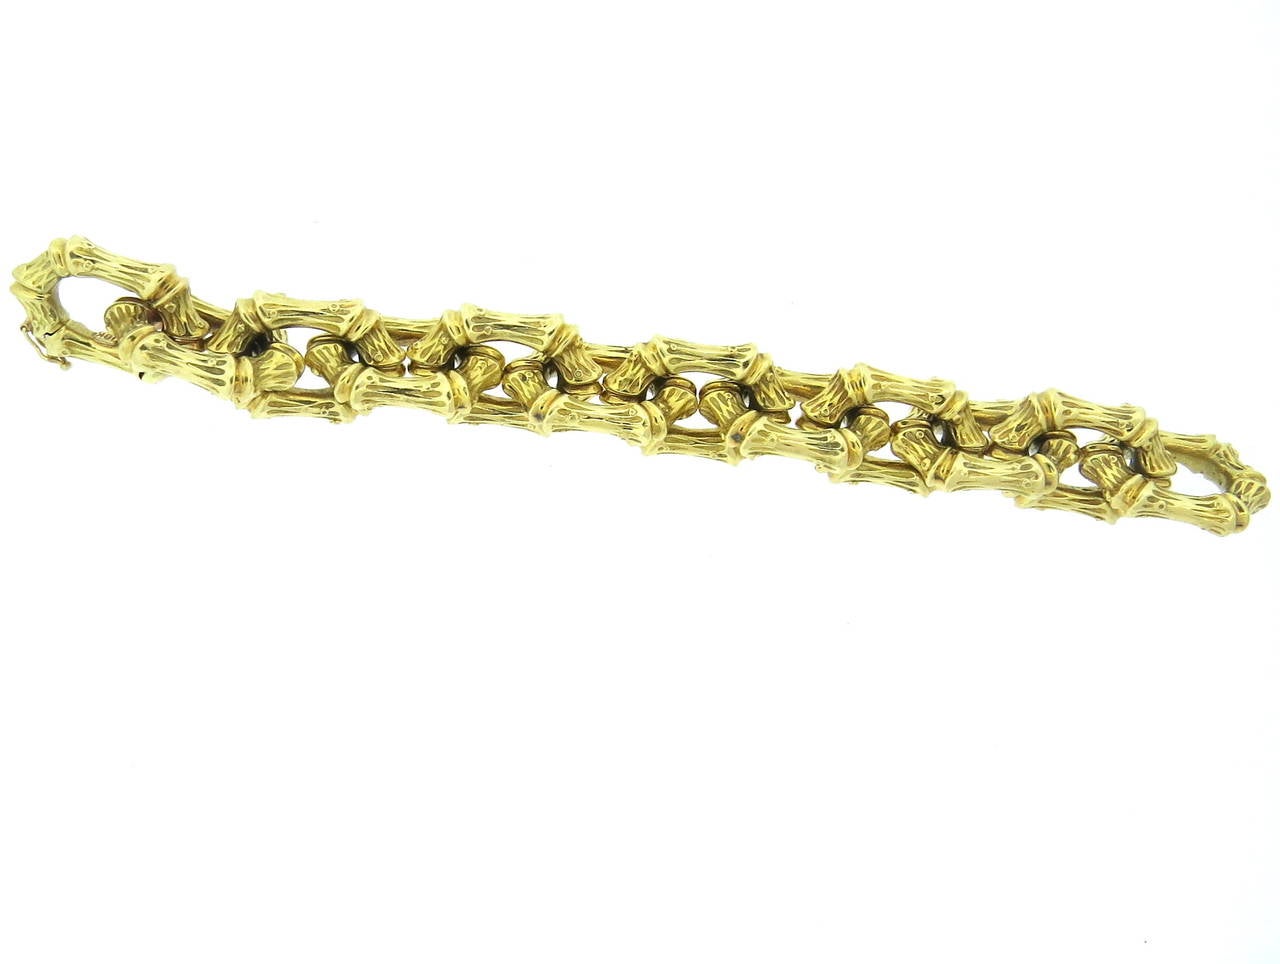 An 18k yellow gold bracelet from the Bamboo Collection by Tiffany & Co.  The bracelet measures 8.5